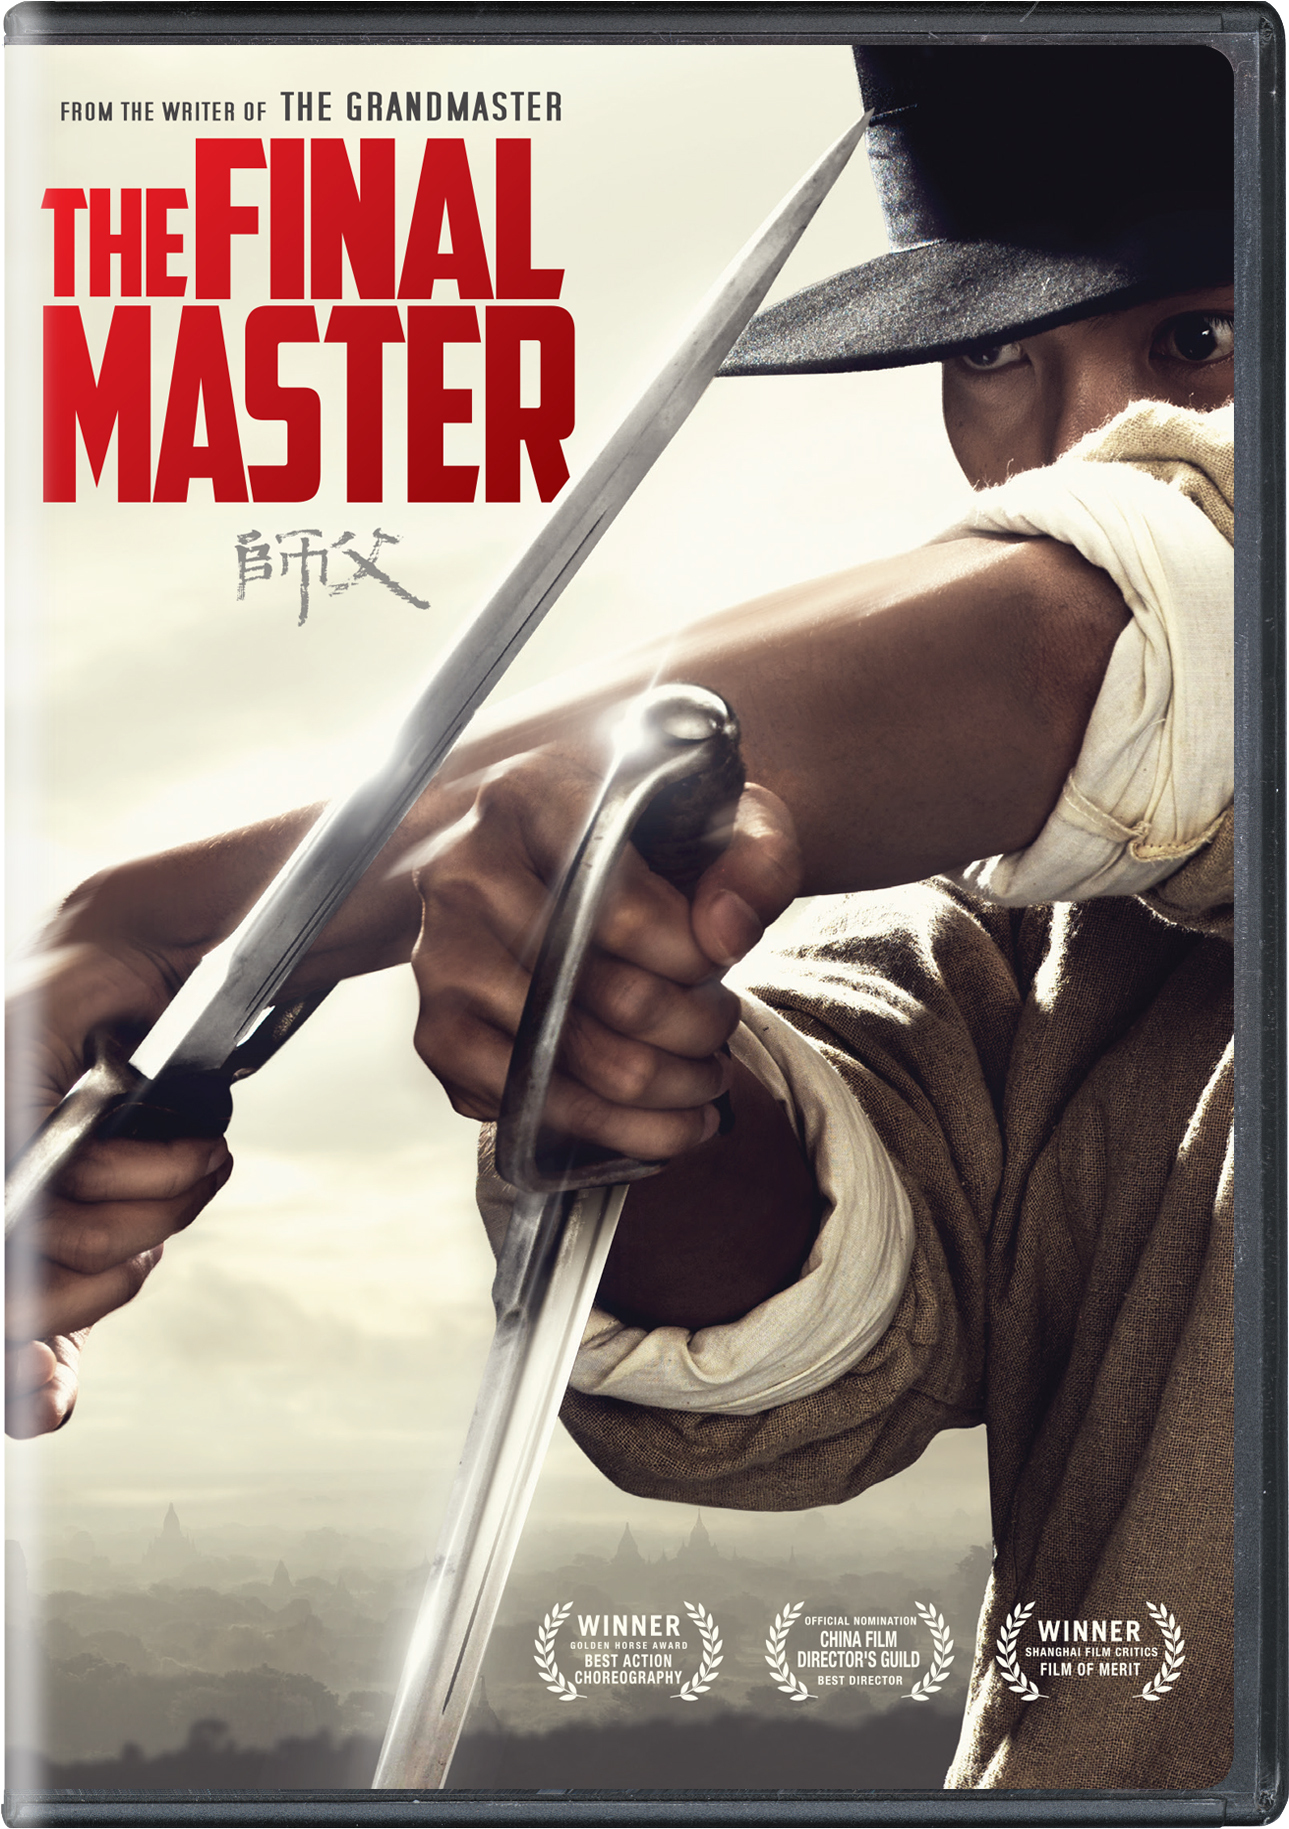 The Final Master - DVD [ 2017 ]  - Foreign Movies On DVD - Movies On GRUV